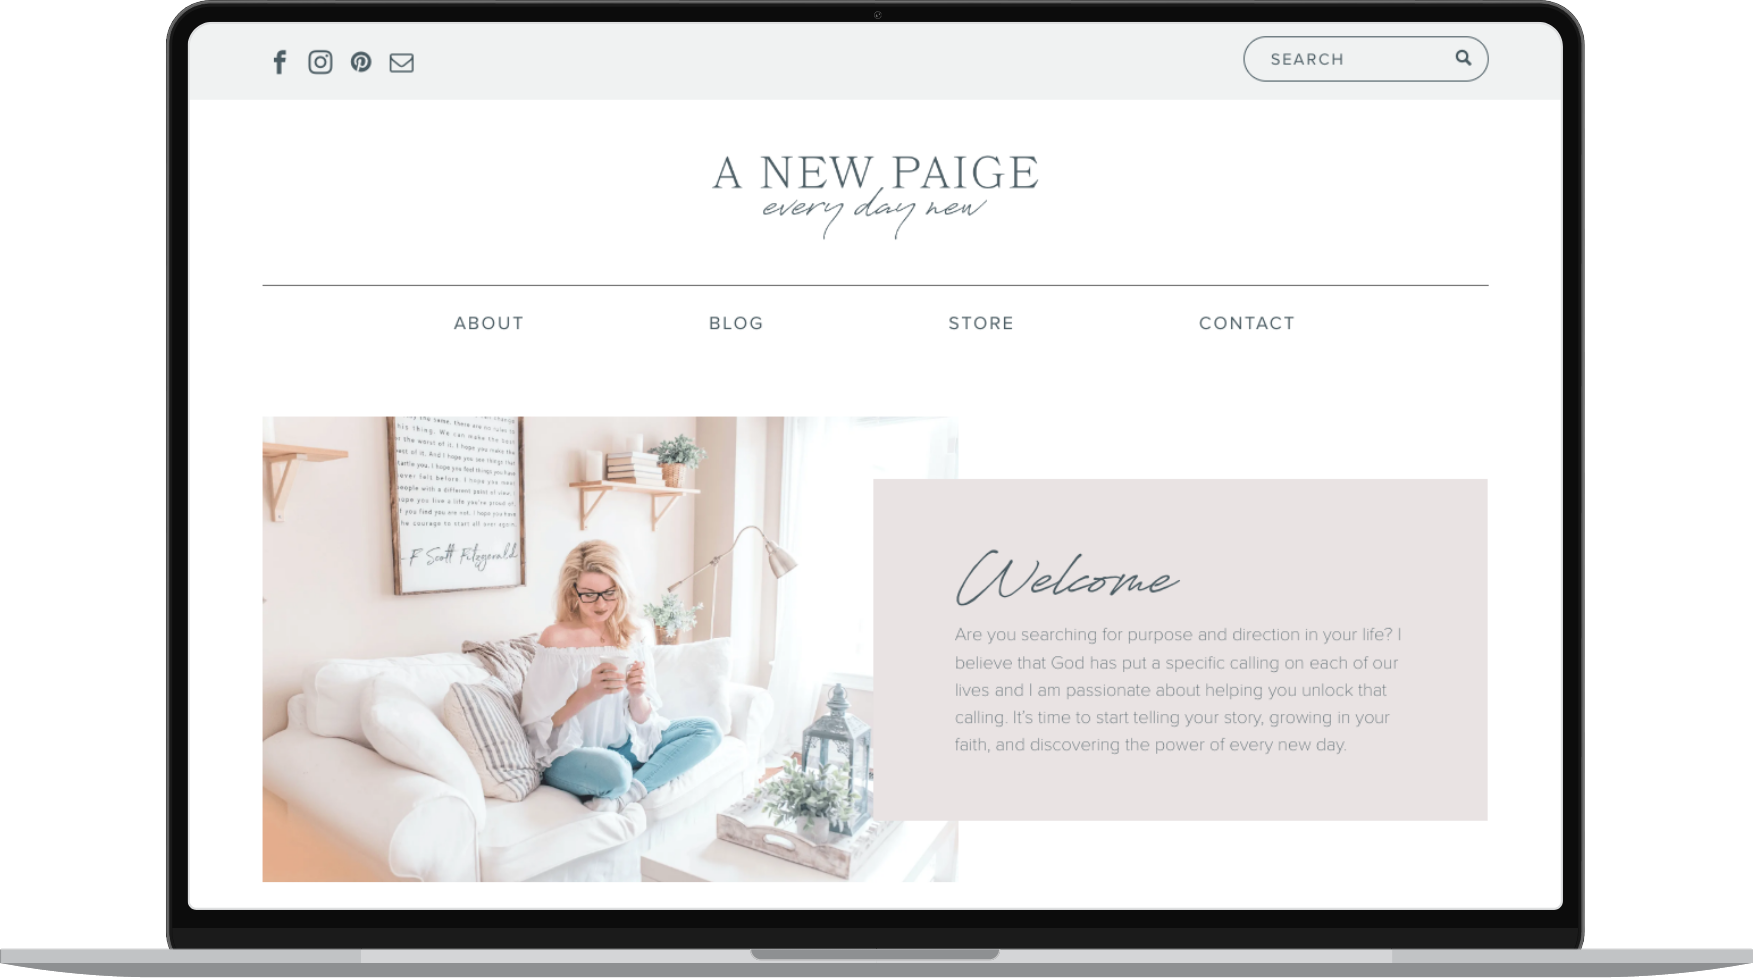 A New Paige website template displayed on desktop